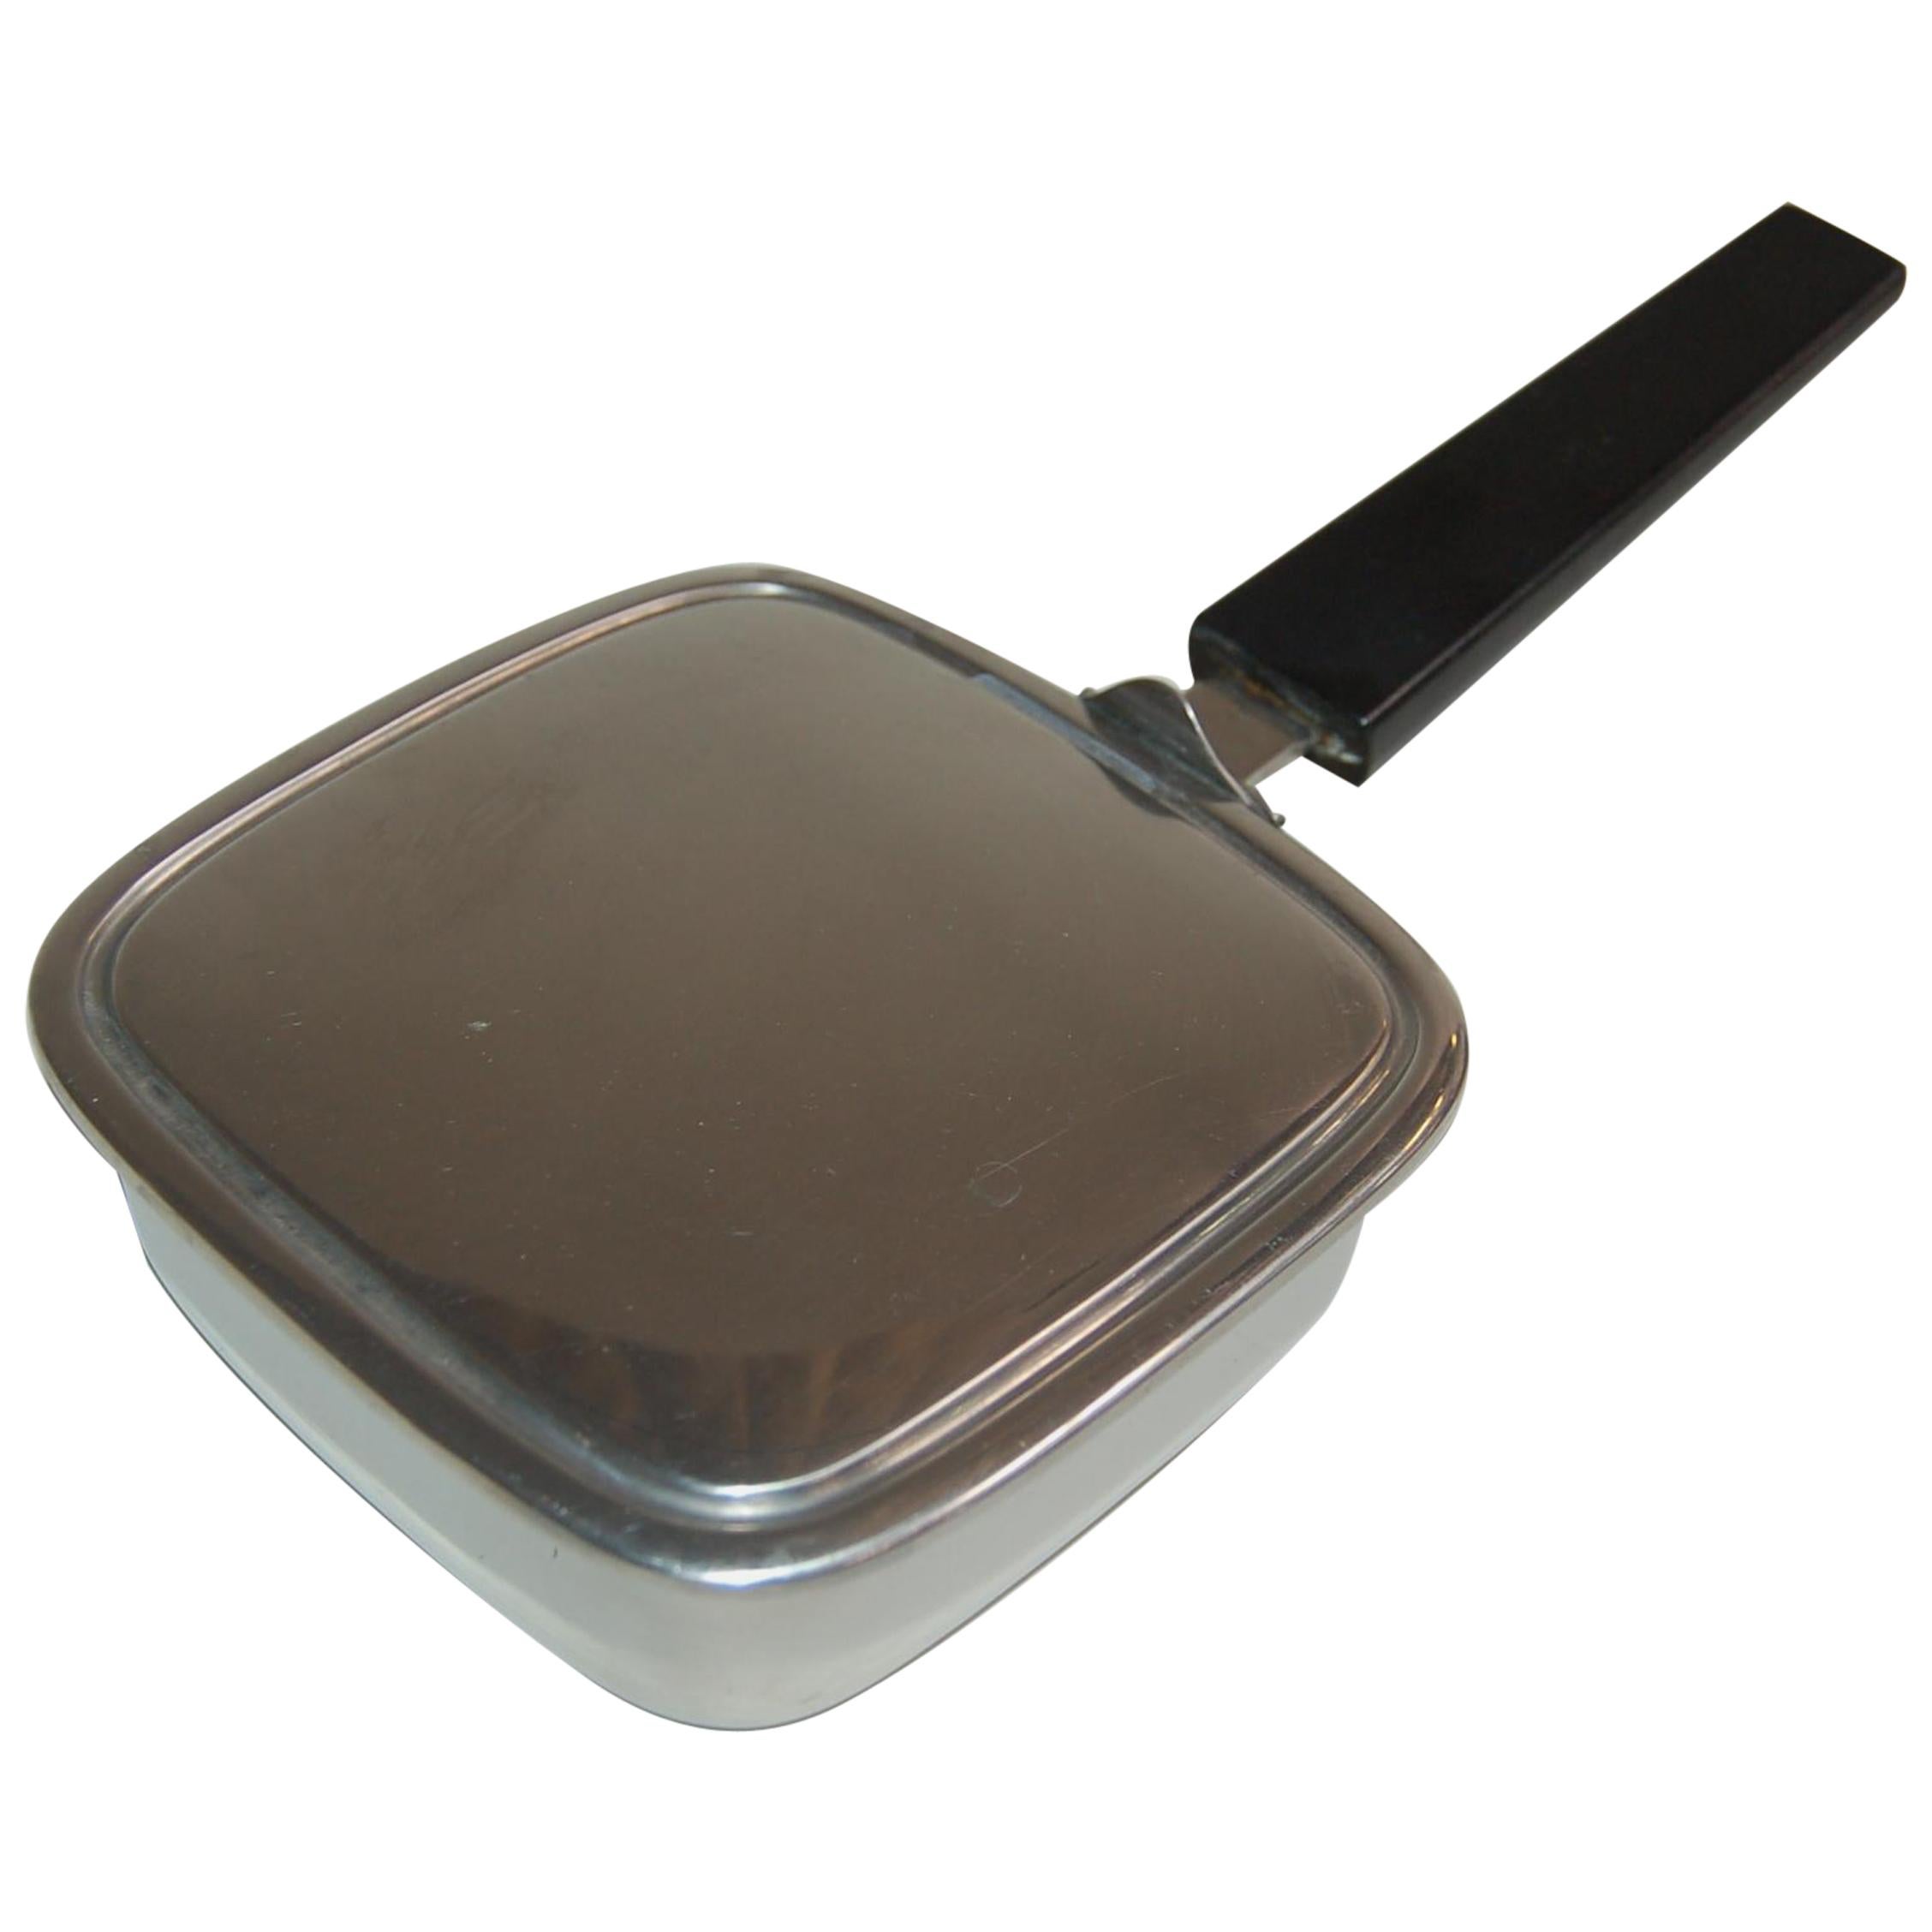 Stainless Steel Crumb Catcher Ashtray Butler Bakelite Handle Made in Sweden For Sale